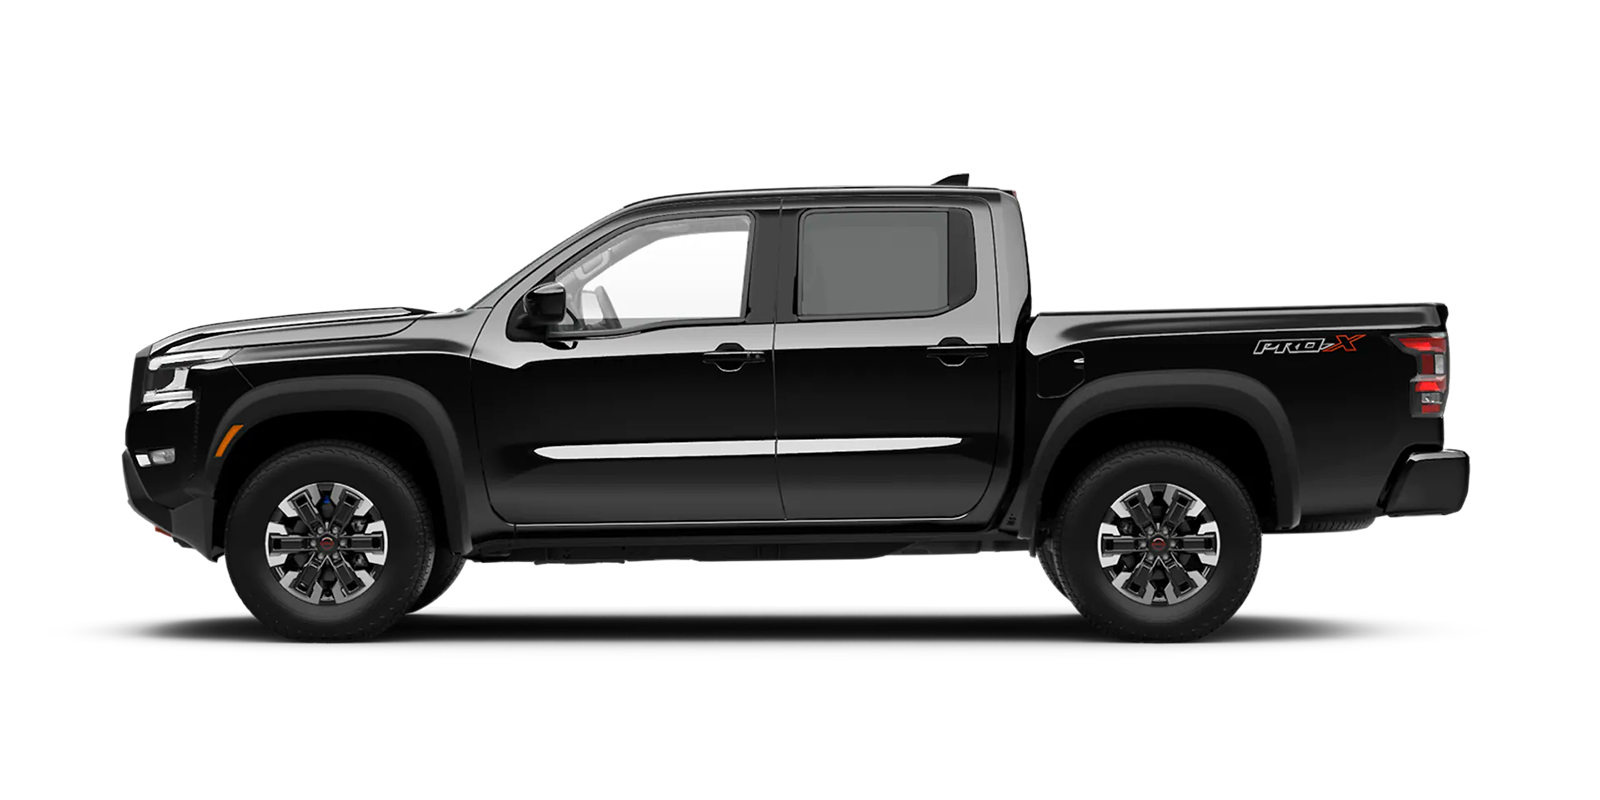 2022 Frontier Crew Cab Pro-X 4x2 in Super Black | Wallace Nissan of Kingsport in Kingsport TN